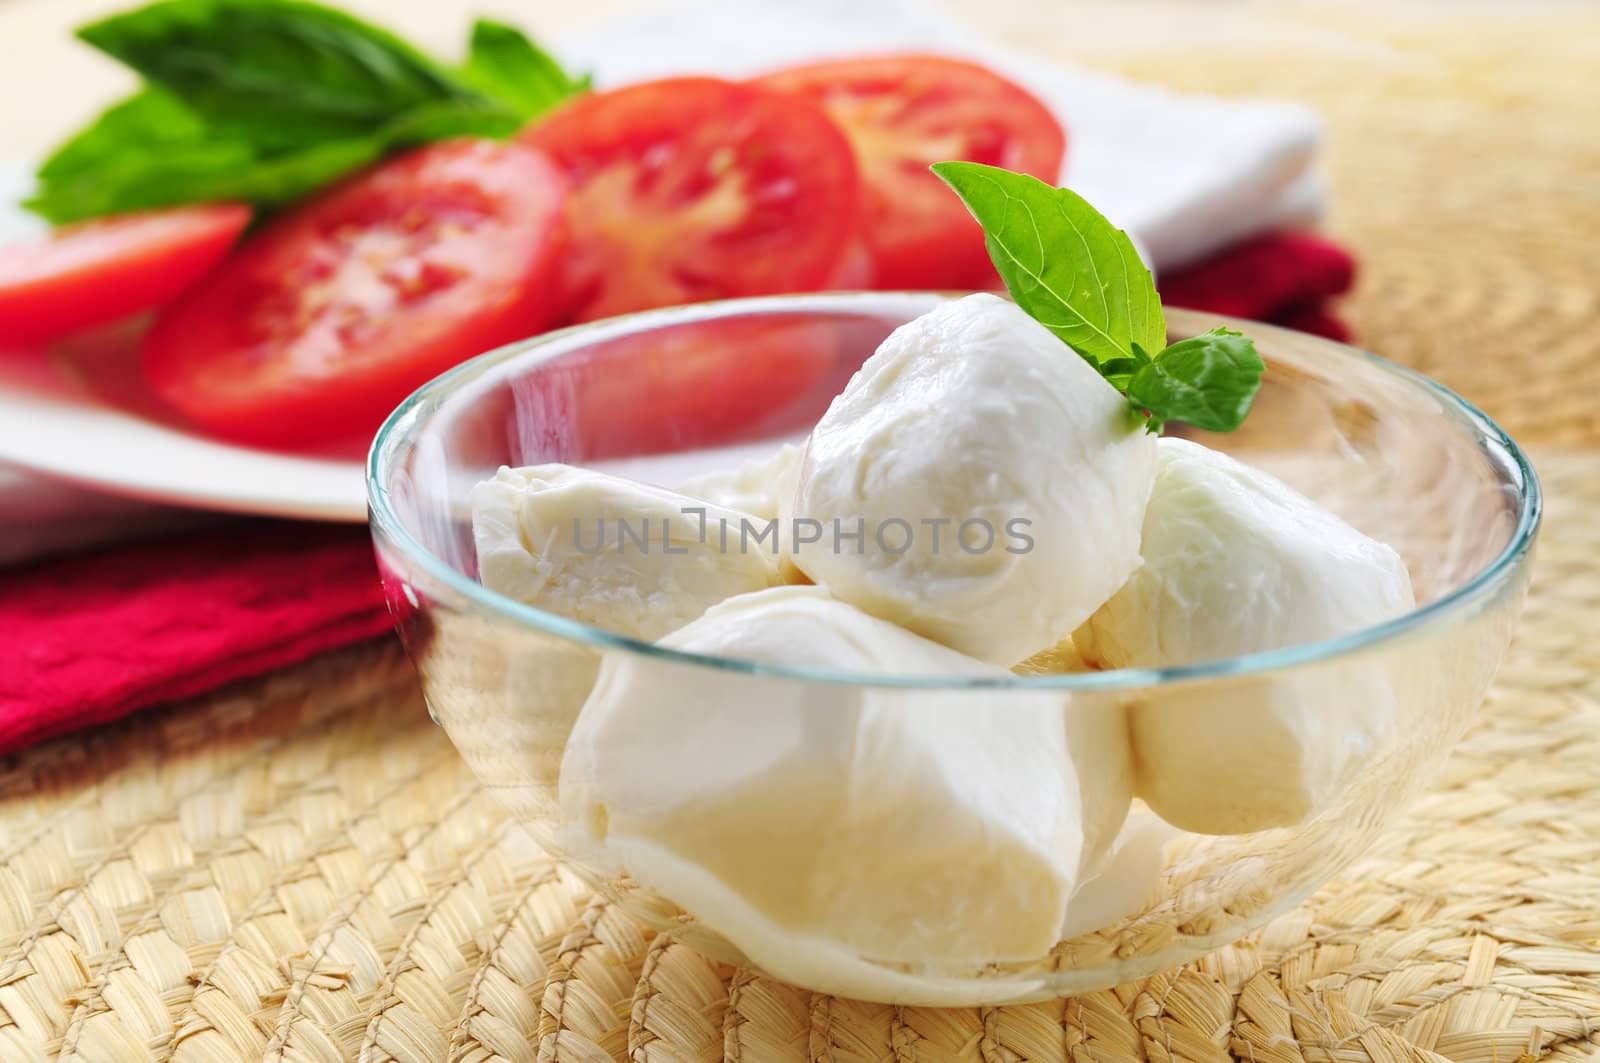 Bocconcini cheese by elenathewise